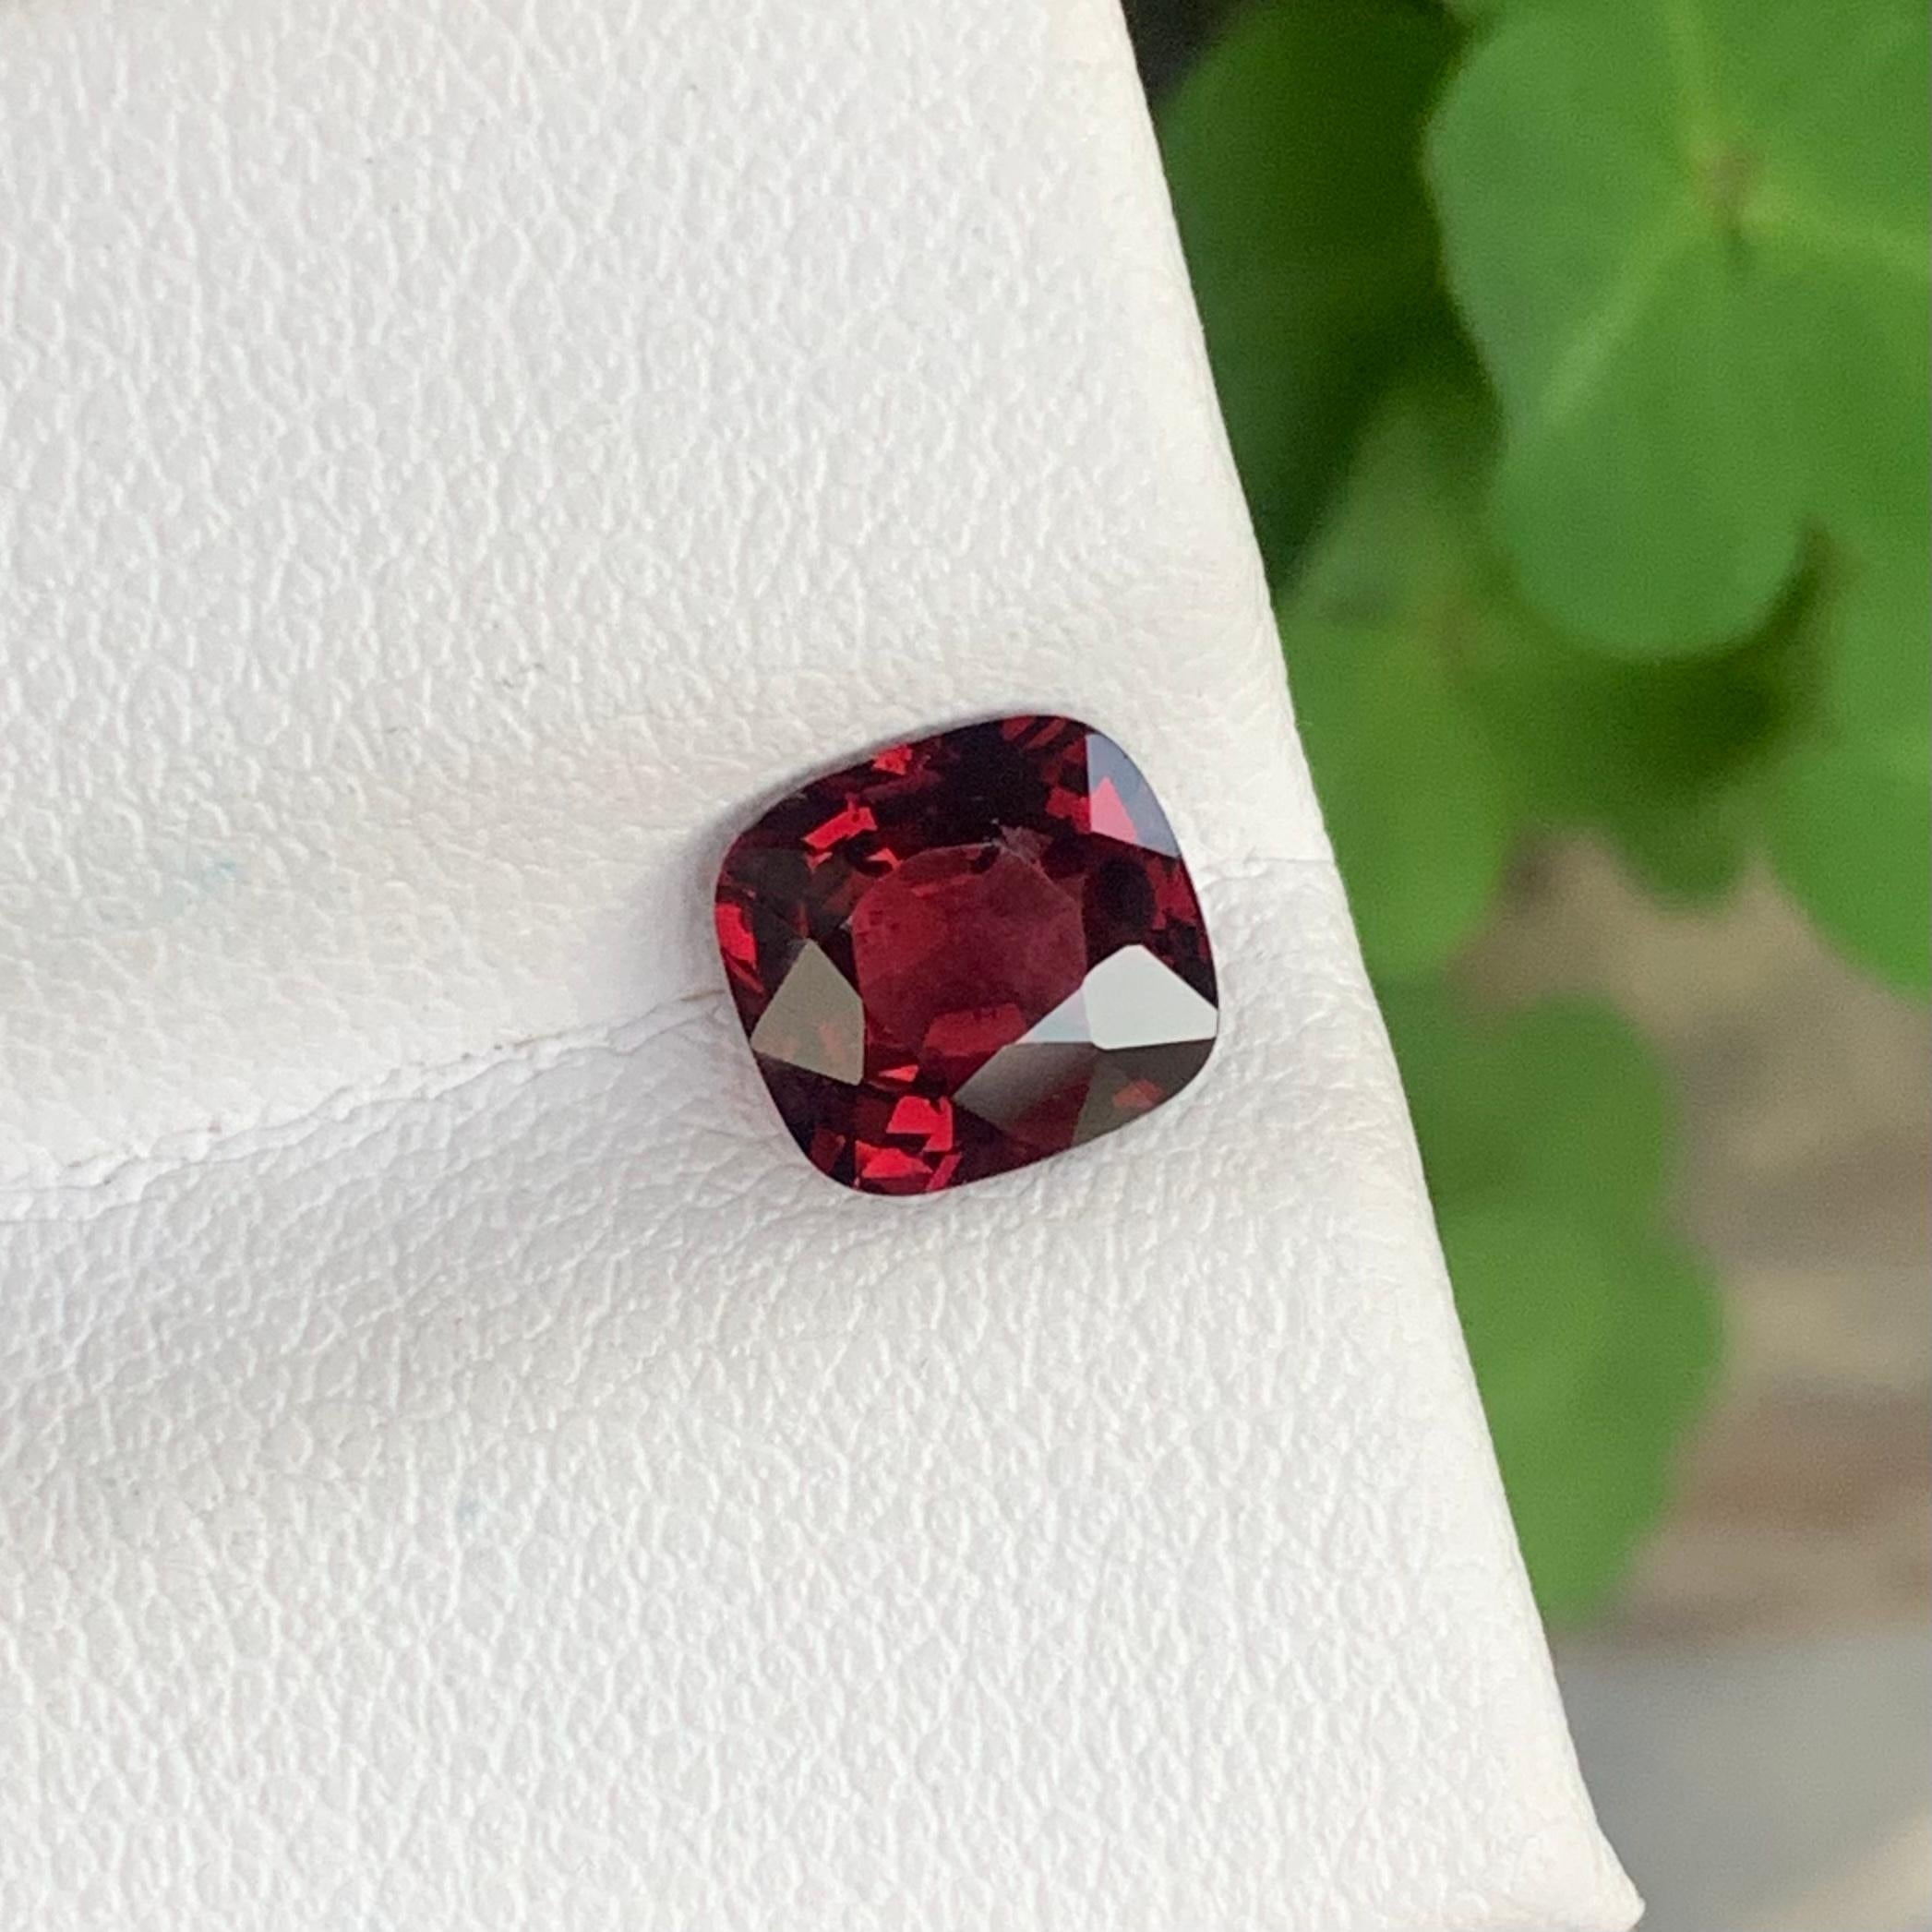 Baroque Gorgeous 1.40 Carat Cushion Shape Natural Loose Red Burmese Spinel Gemstone For Sale